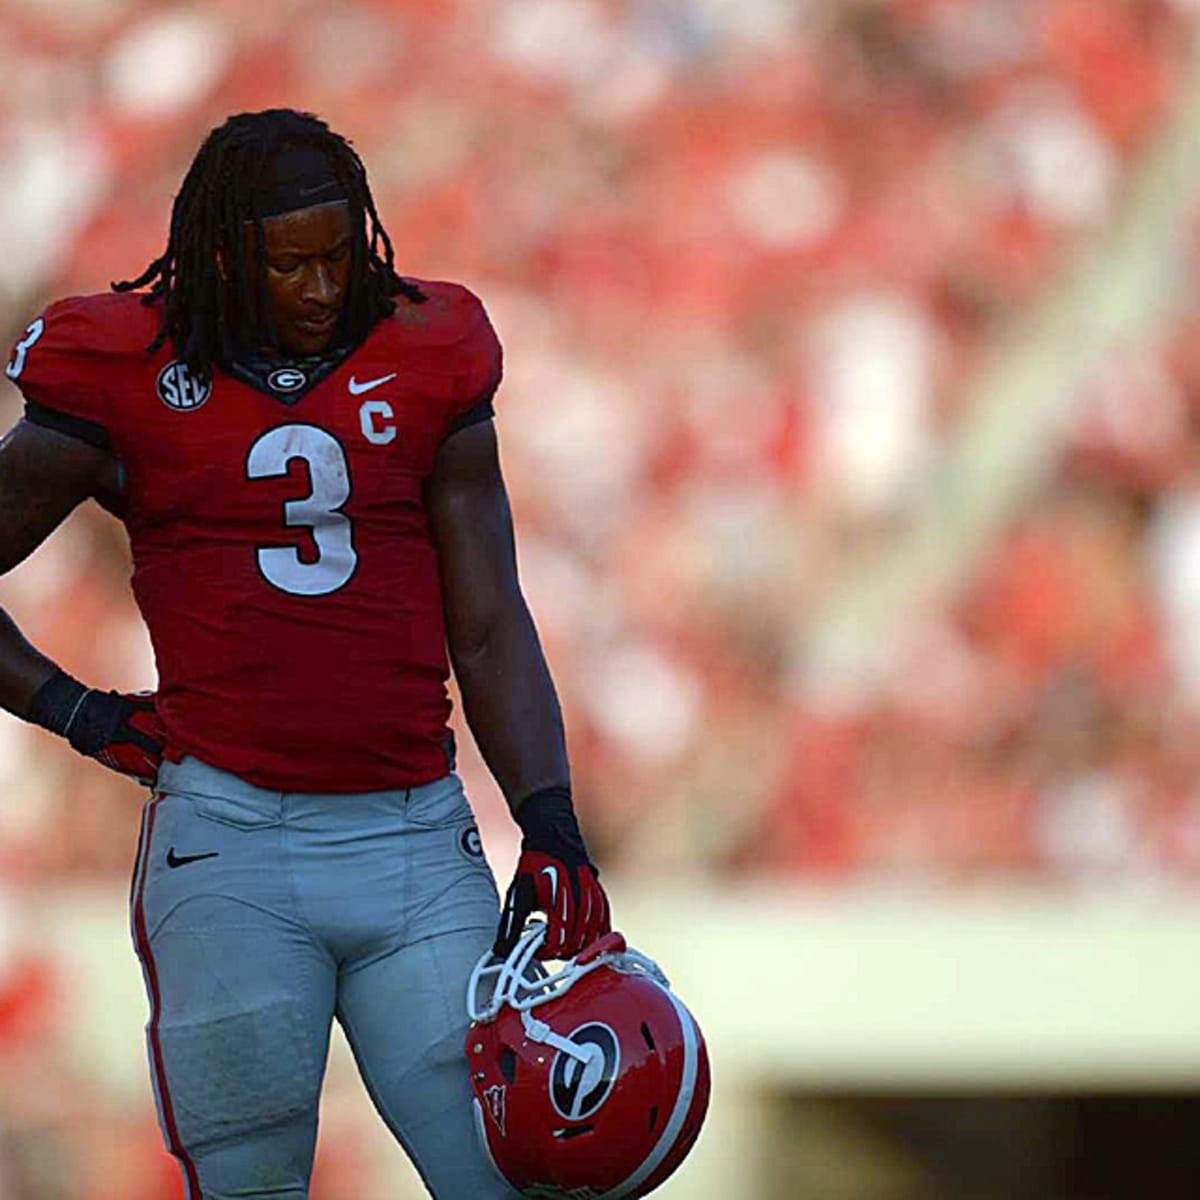 Why Won't Anyone Give Todd Gurley a Chance?